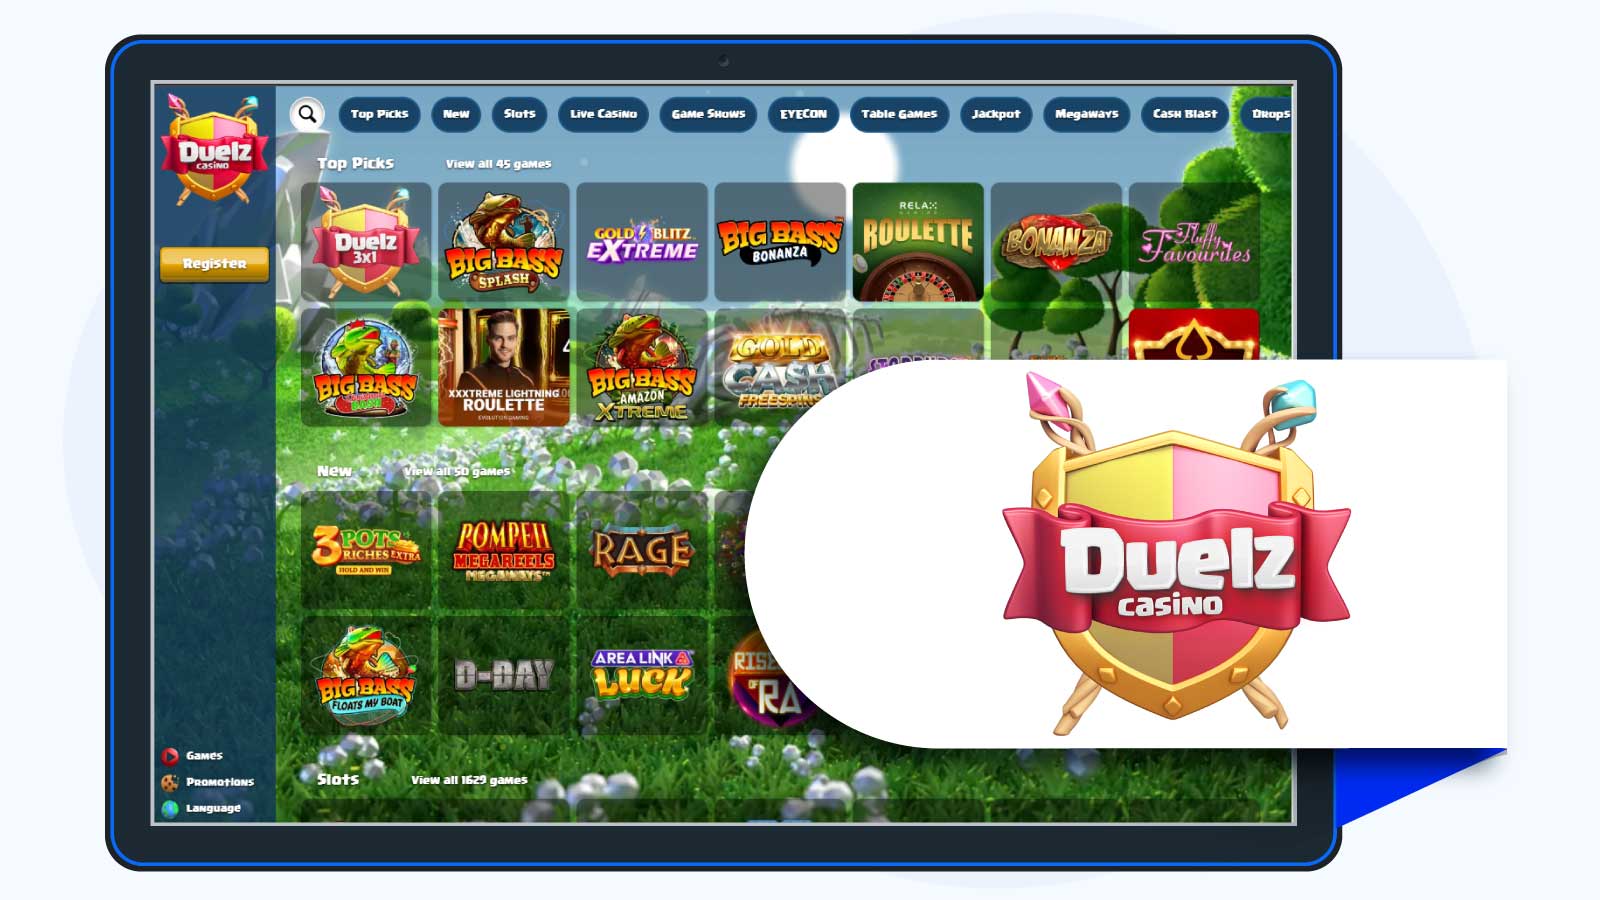 Duelz Casino – Best PayPal Casino Choice for Low Wagering